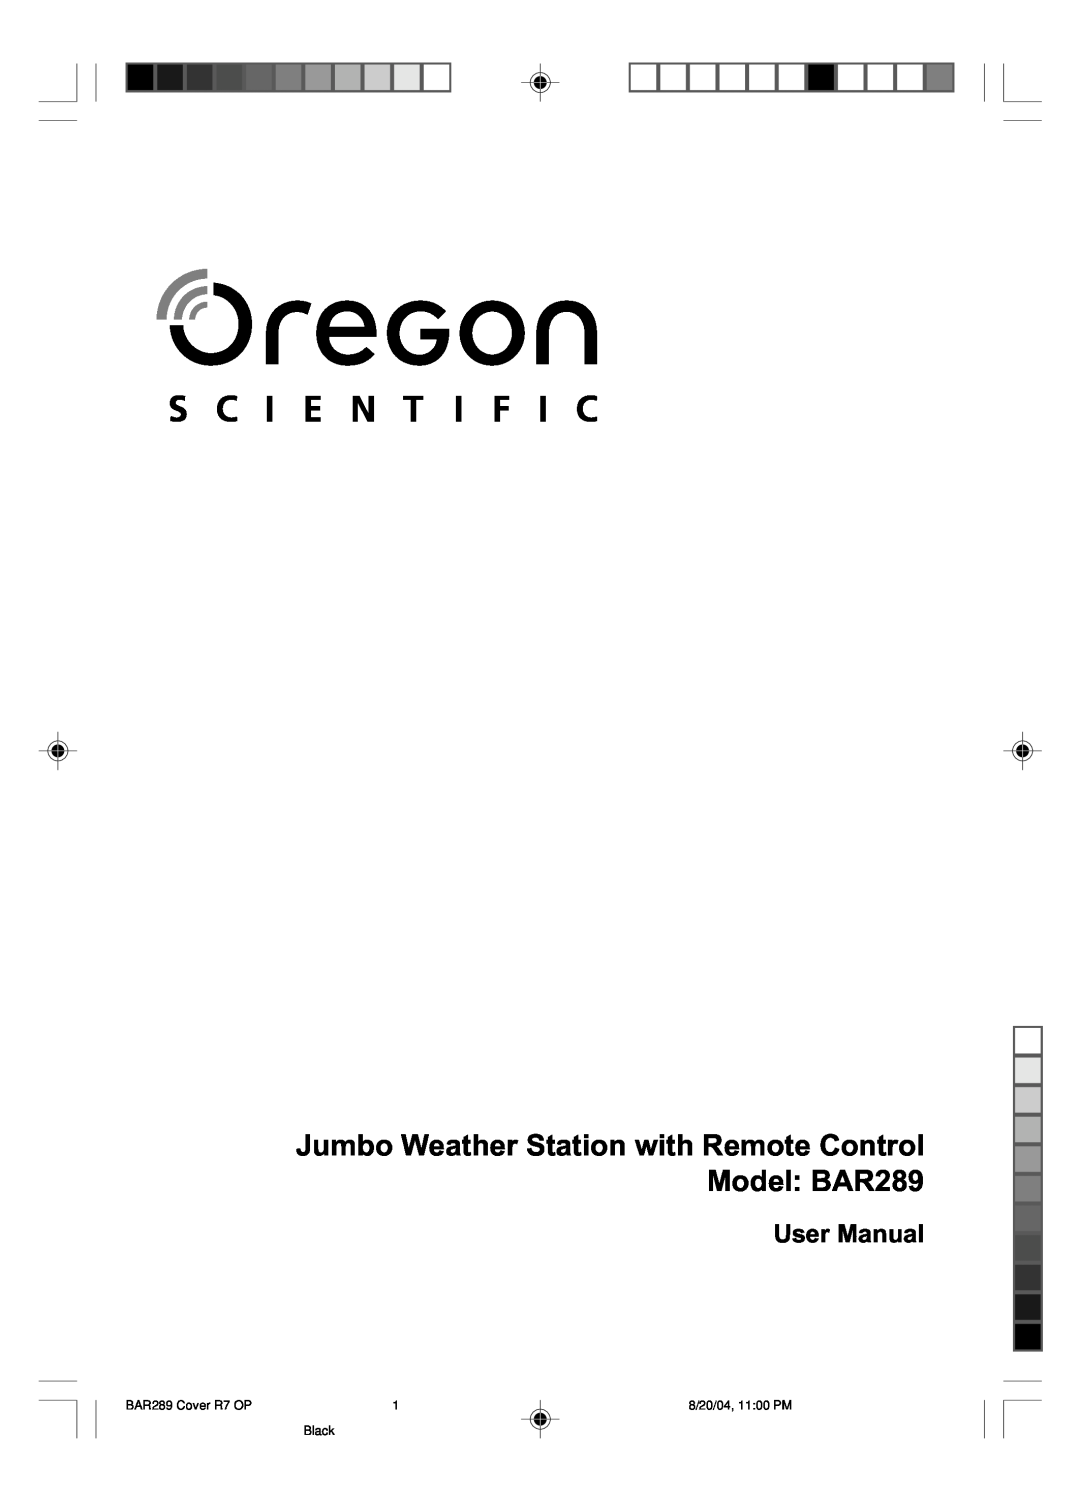 Oregon Scientific user manual Jumbo Weather Station with Remote Control Model BAR289, User Manual, BAR289 Cover R7 OP 